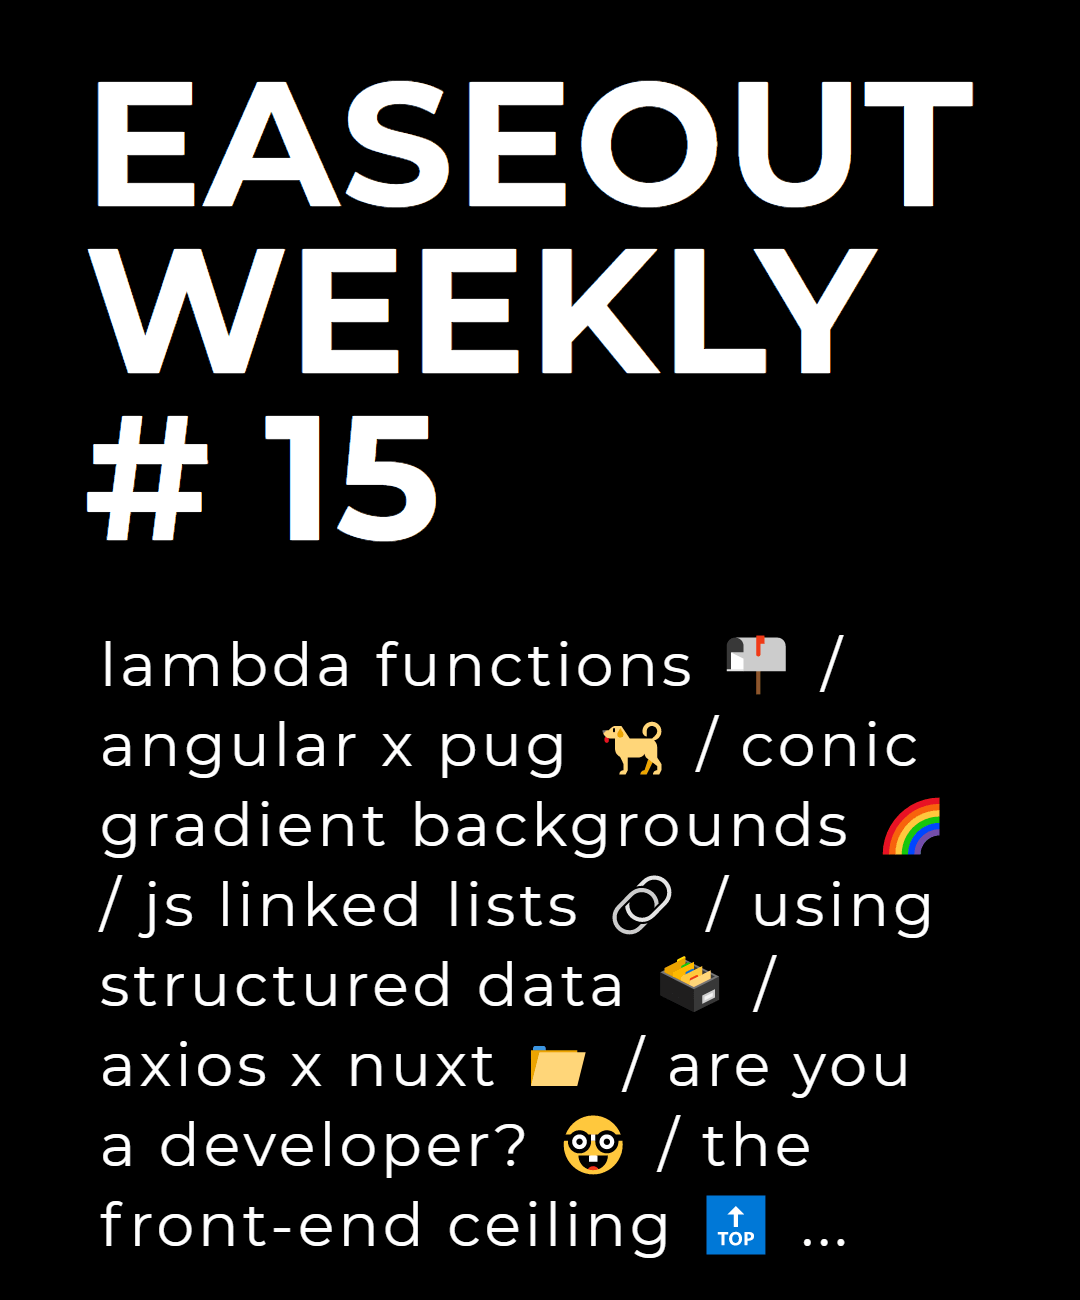 Easeout Weekly #15